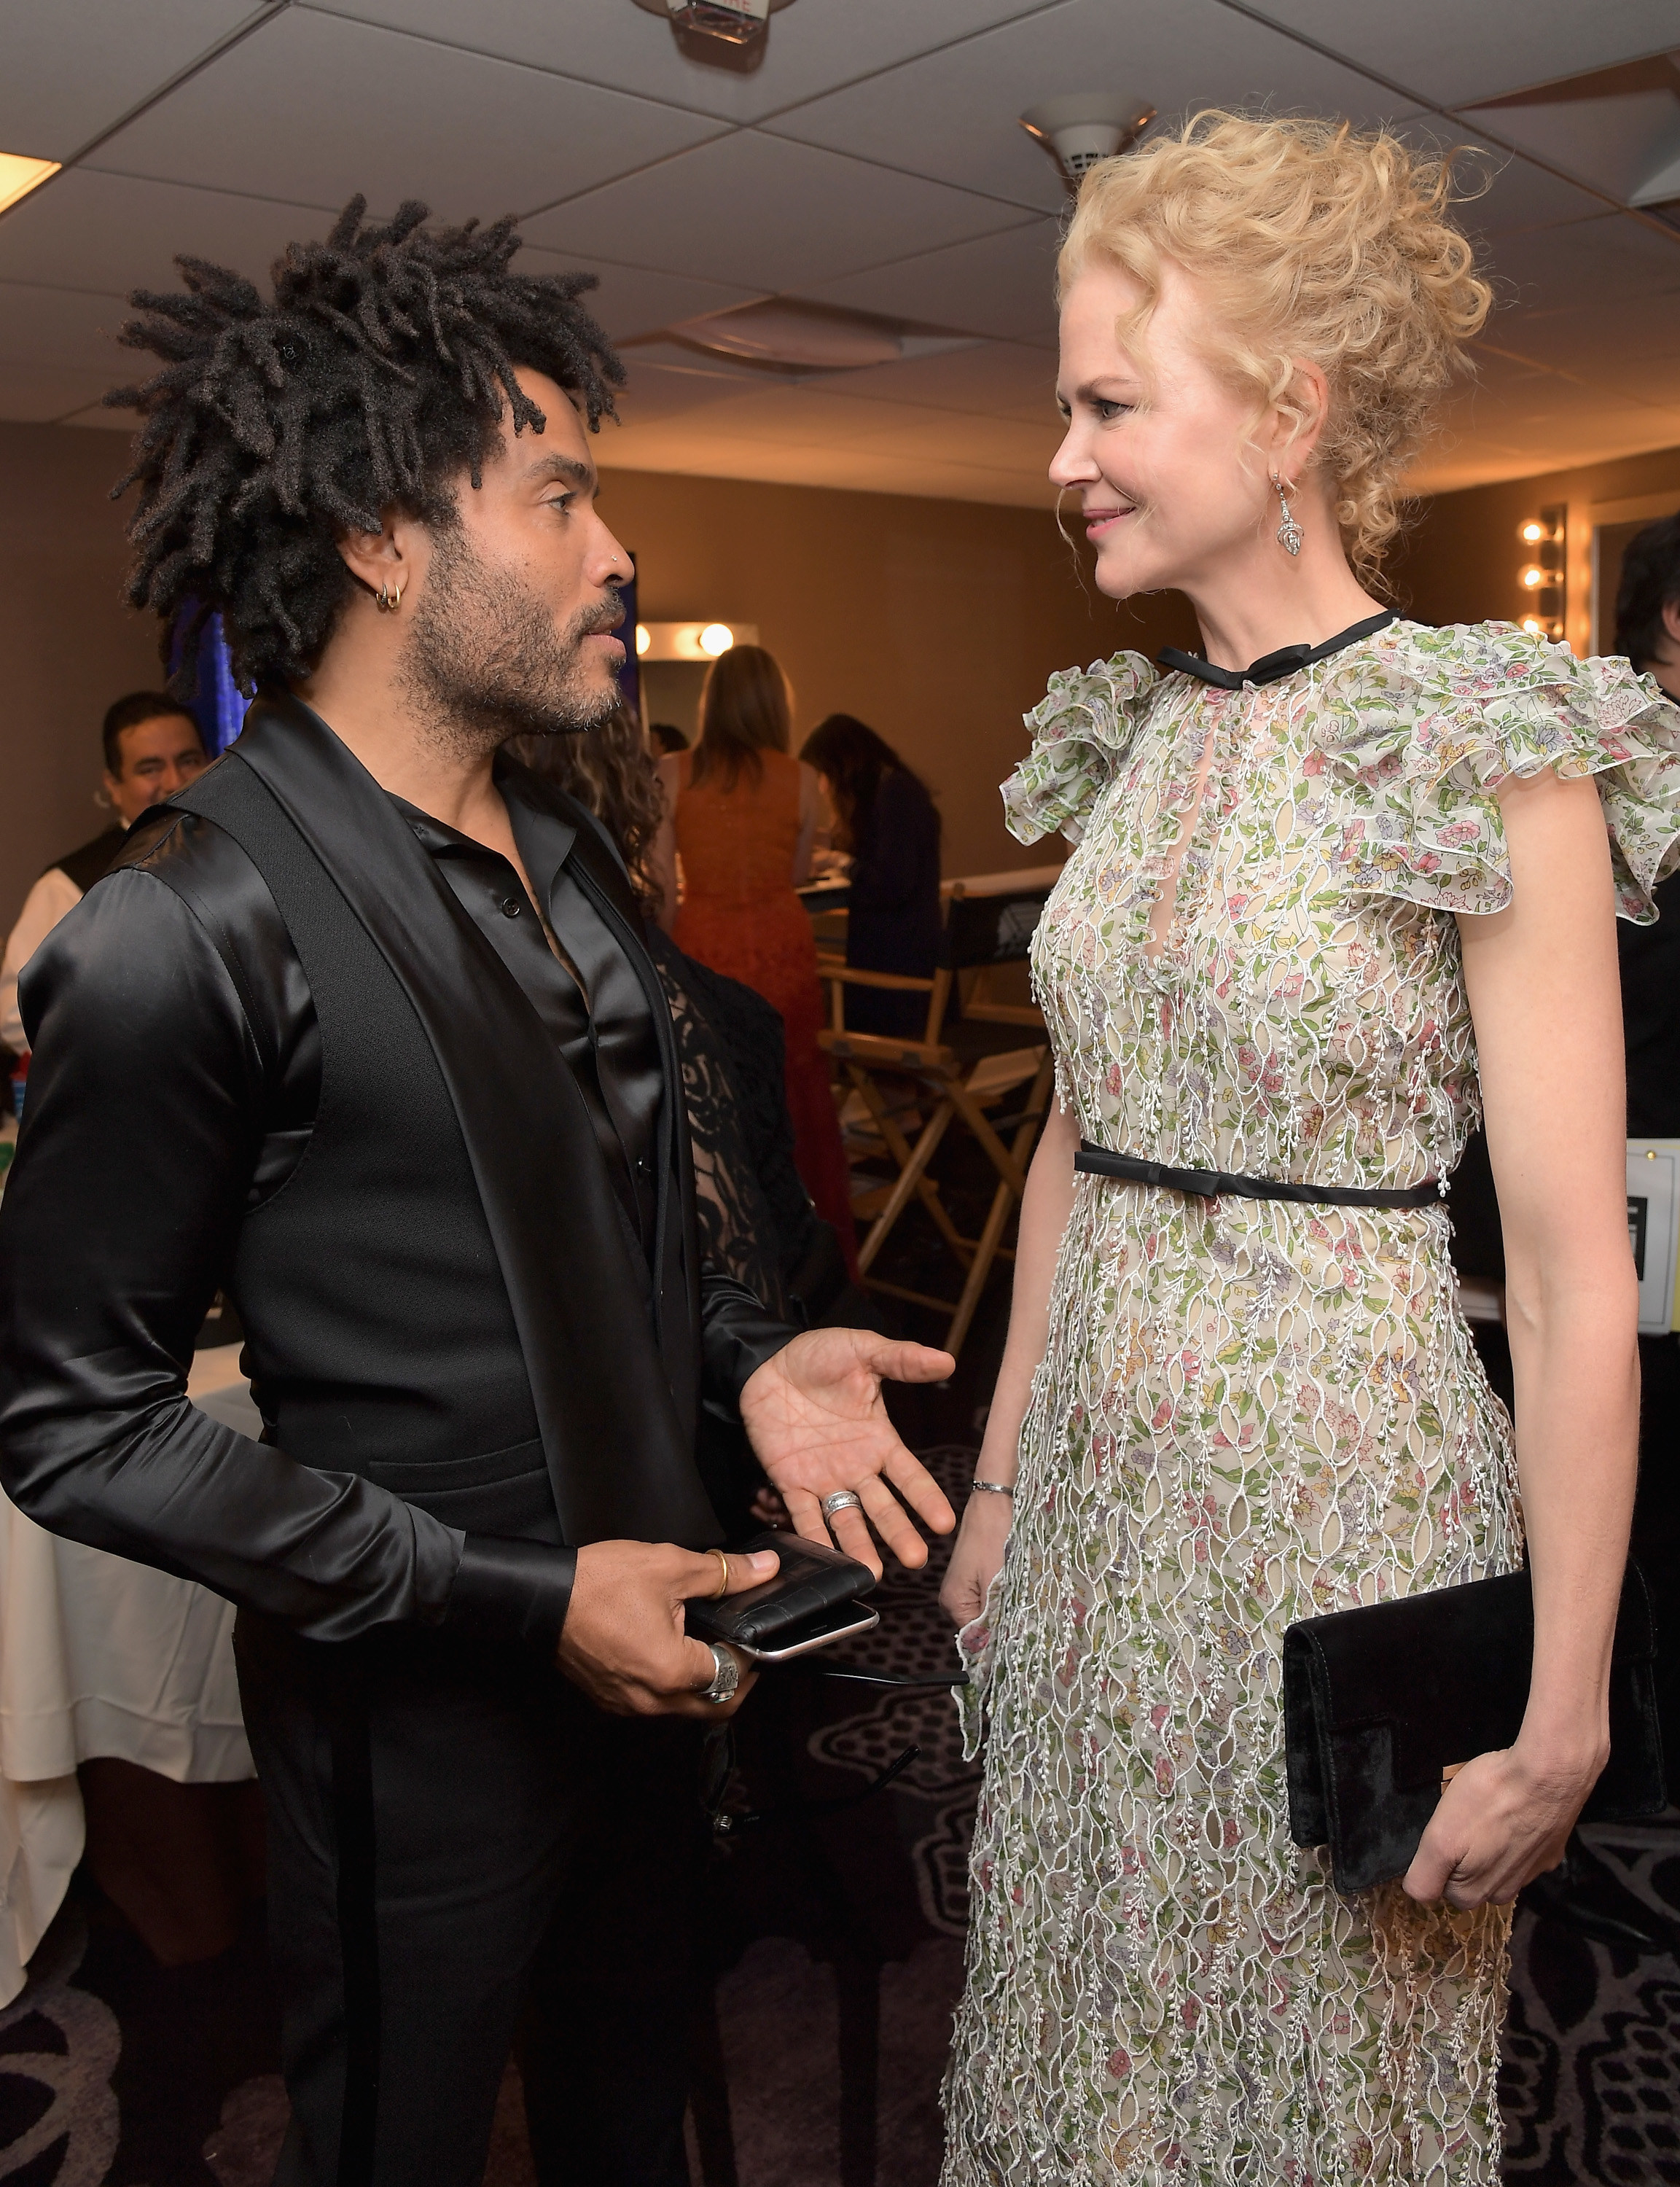 Lenny Kravitz in a black suit and Nicole Kidman in a floral gown talking together